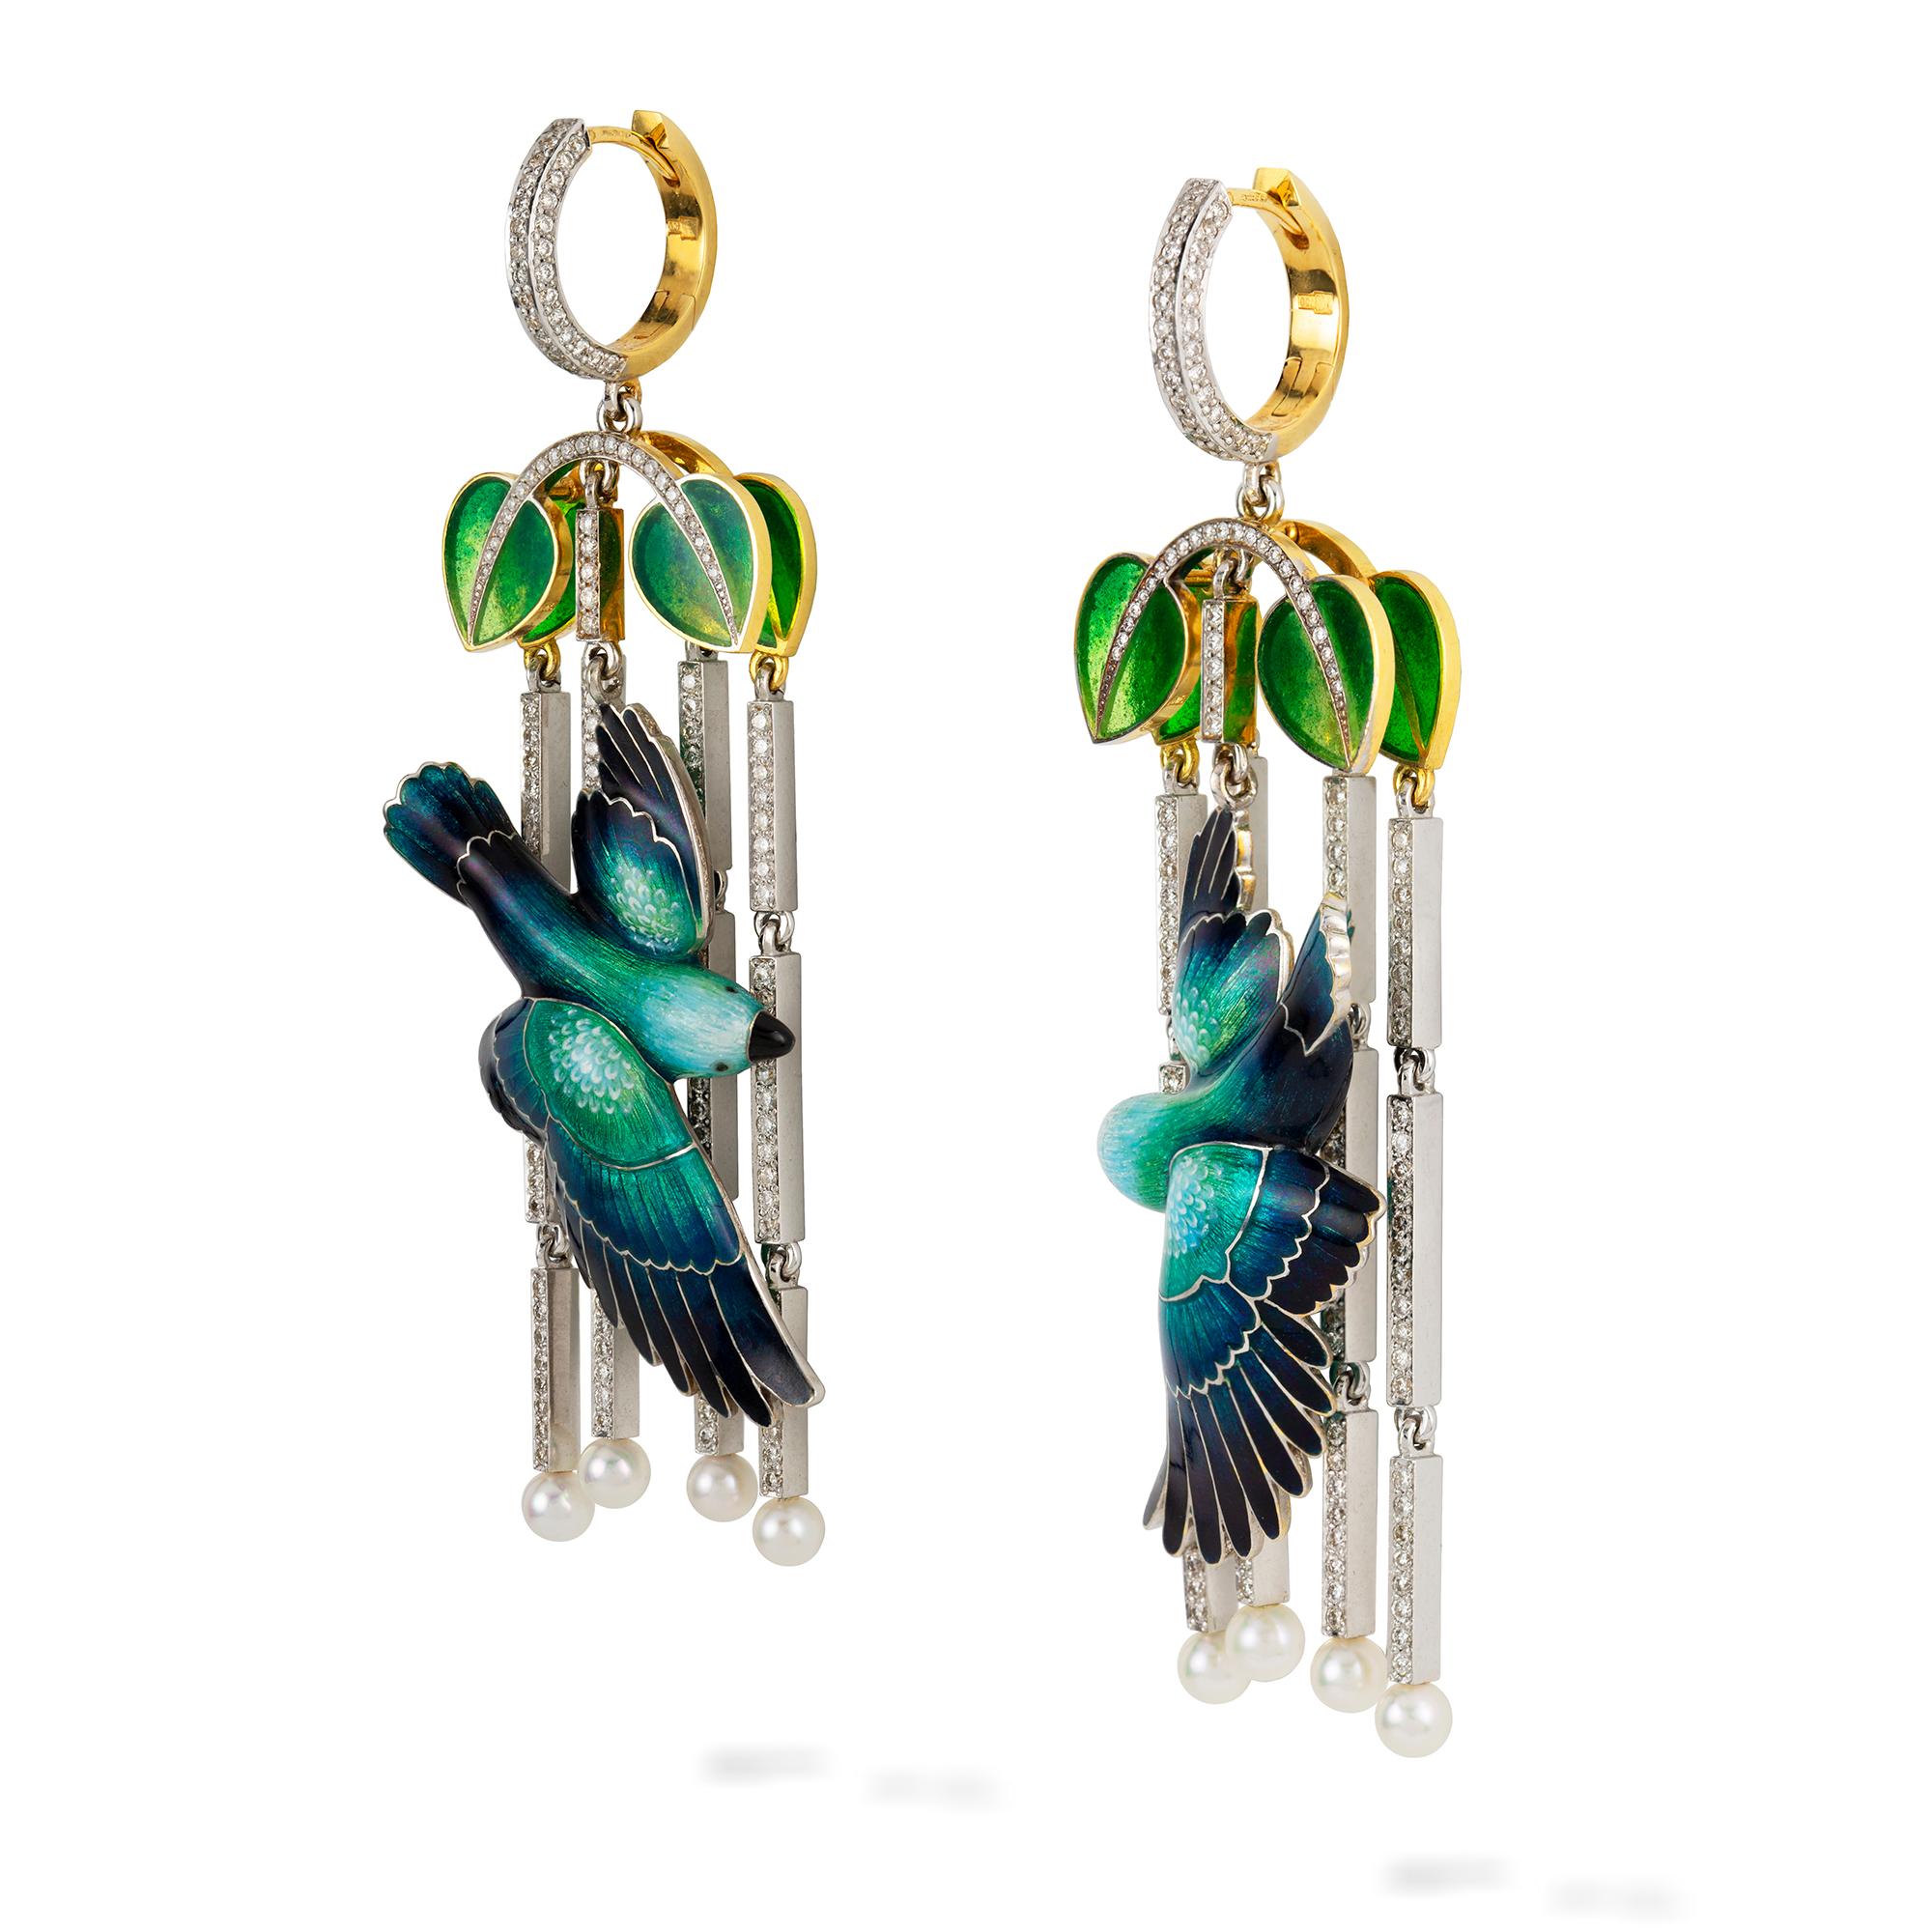 Contemporary Pair of Parrot Earrings by Ilgiz F For Sale